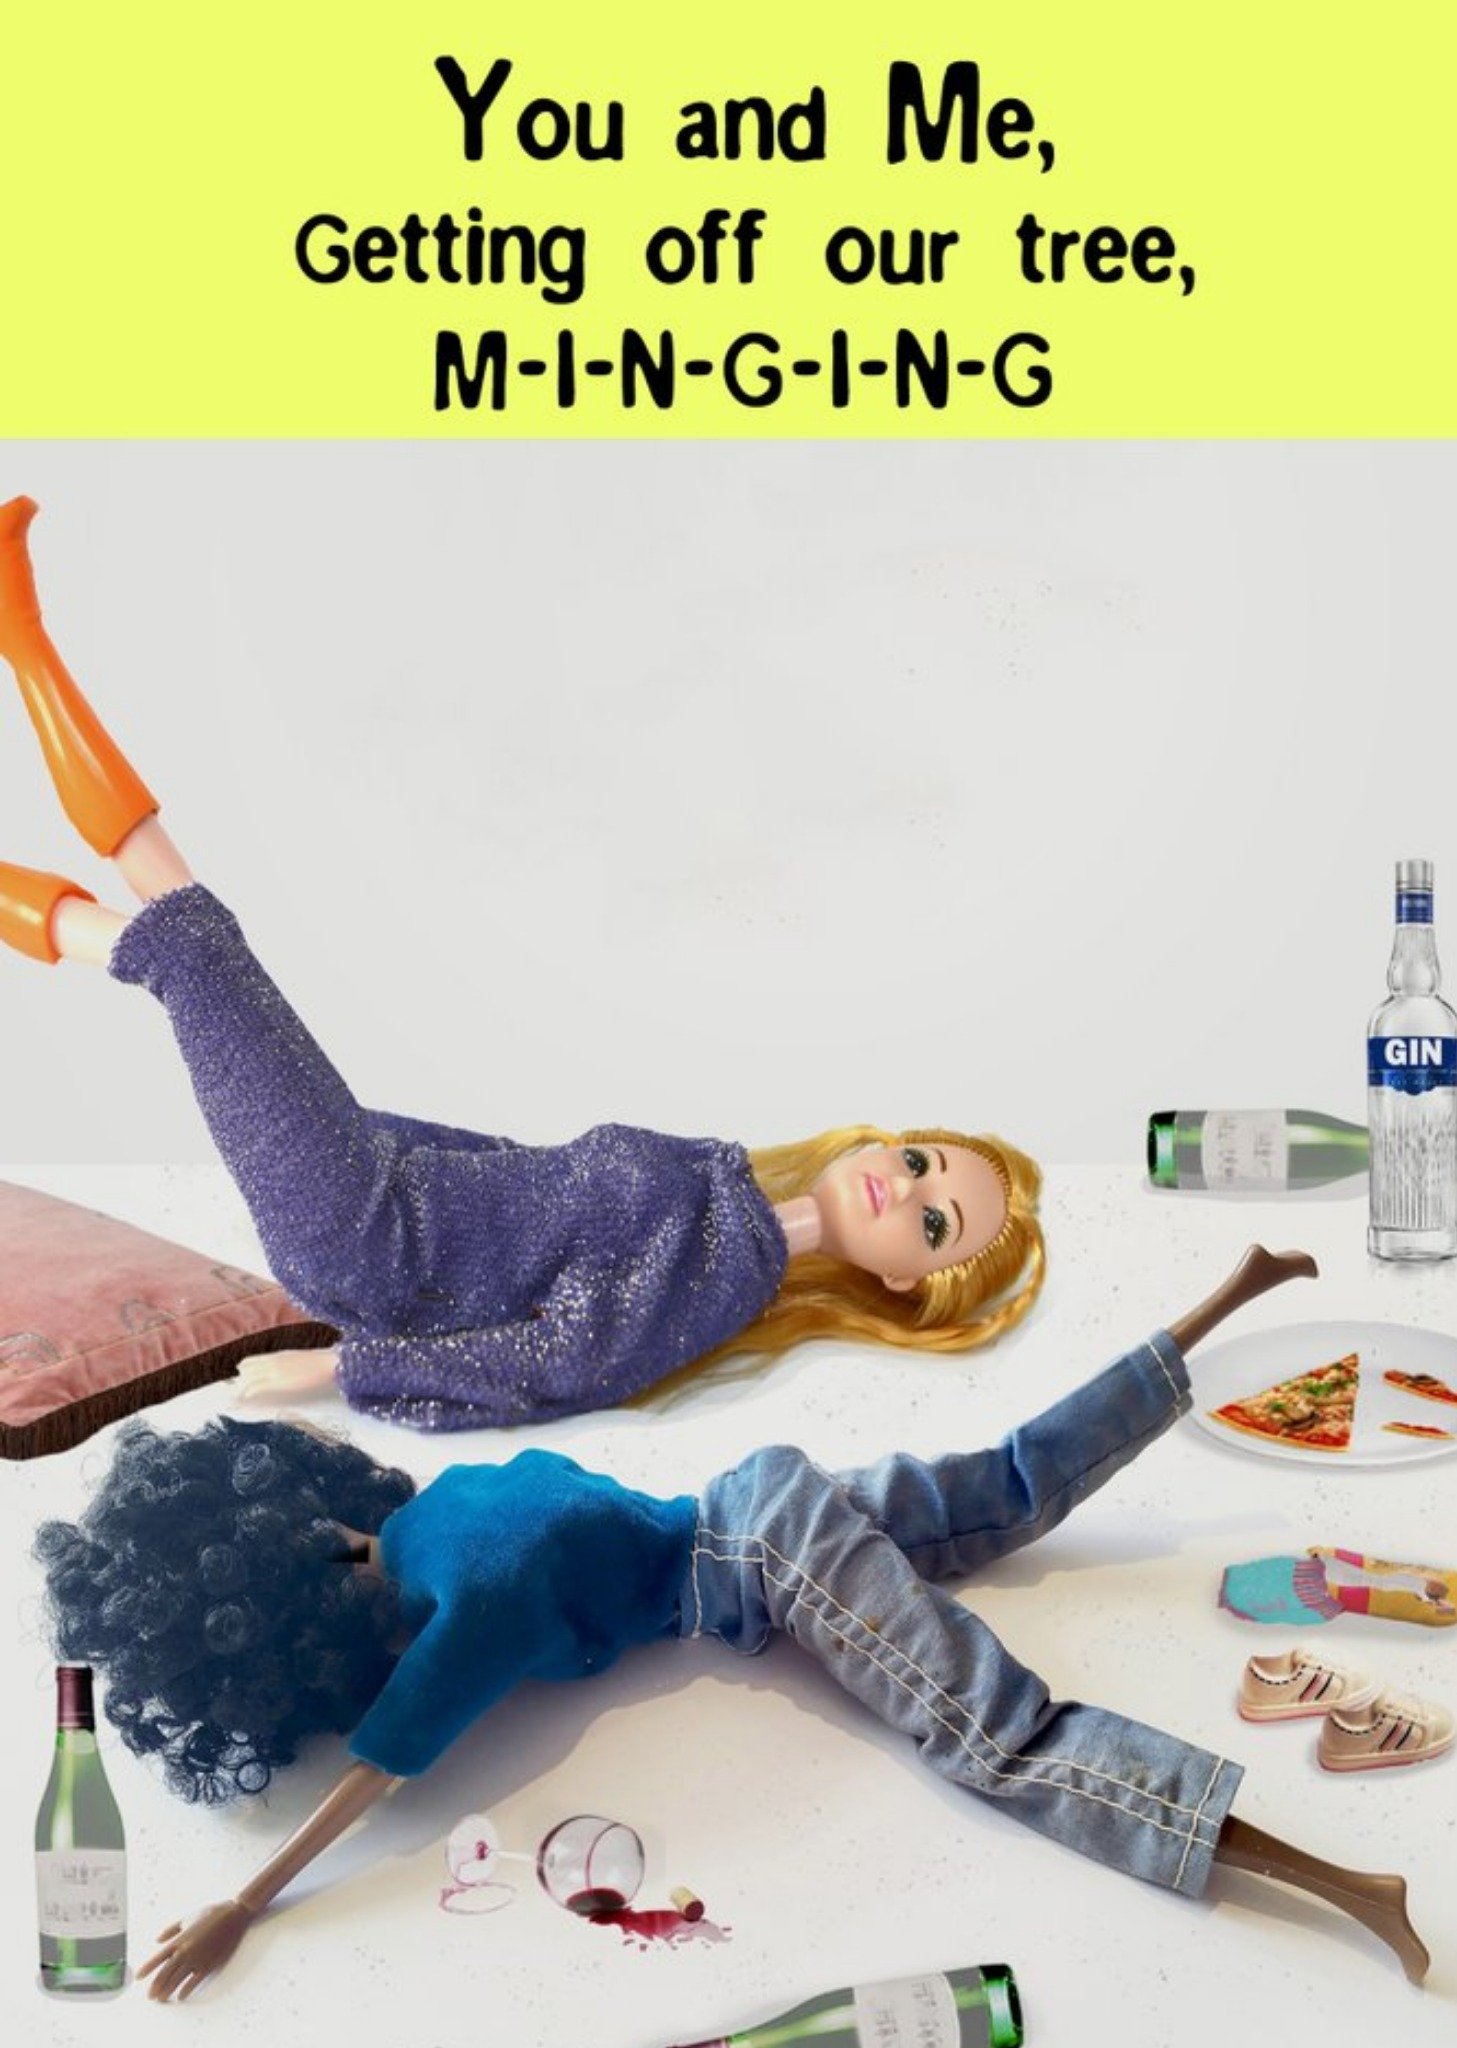 Go La La Hilarious Photograph Of Two Dolls Lying Down Drunk Surrounded By Wine Bottles Birthday Card